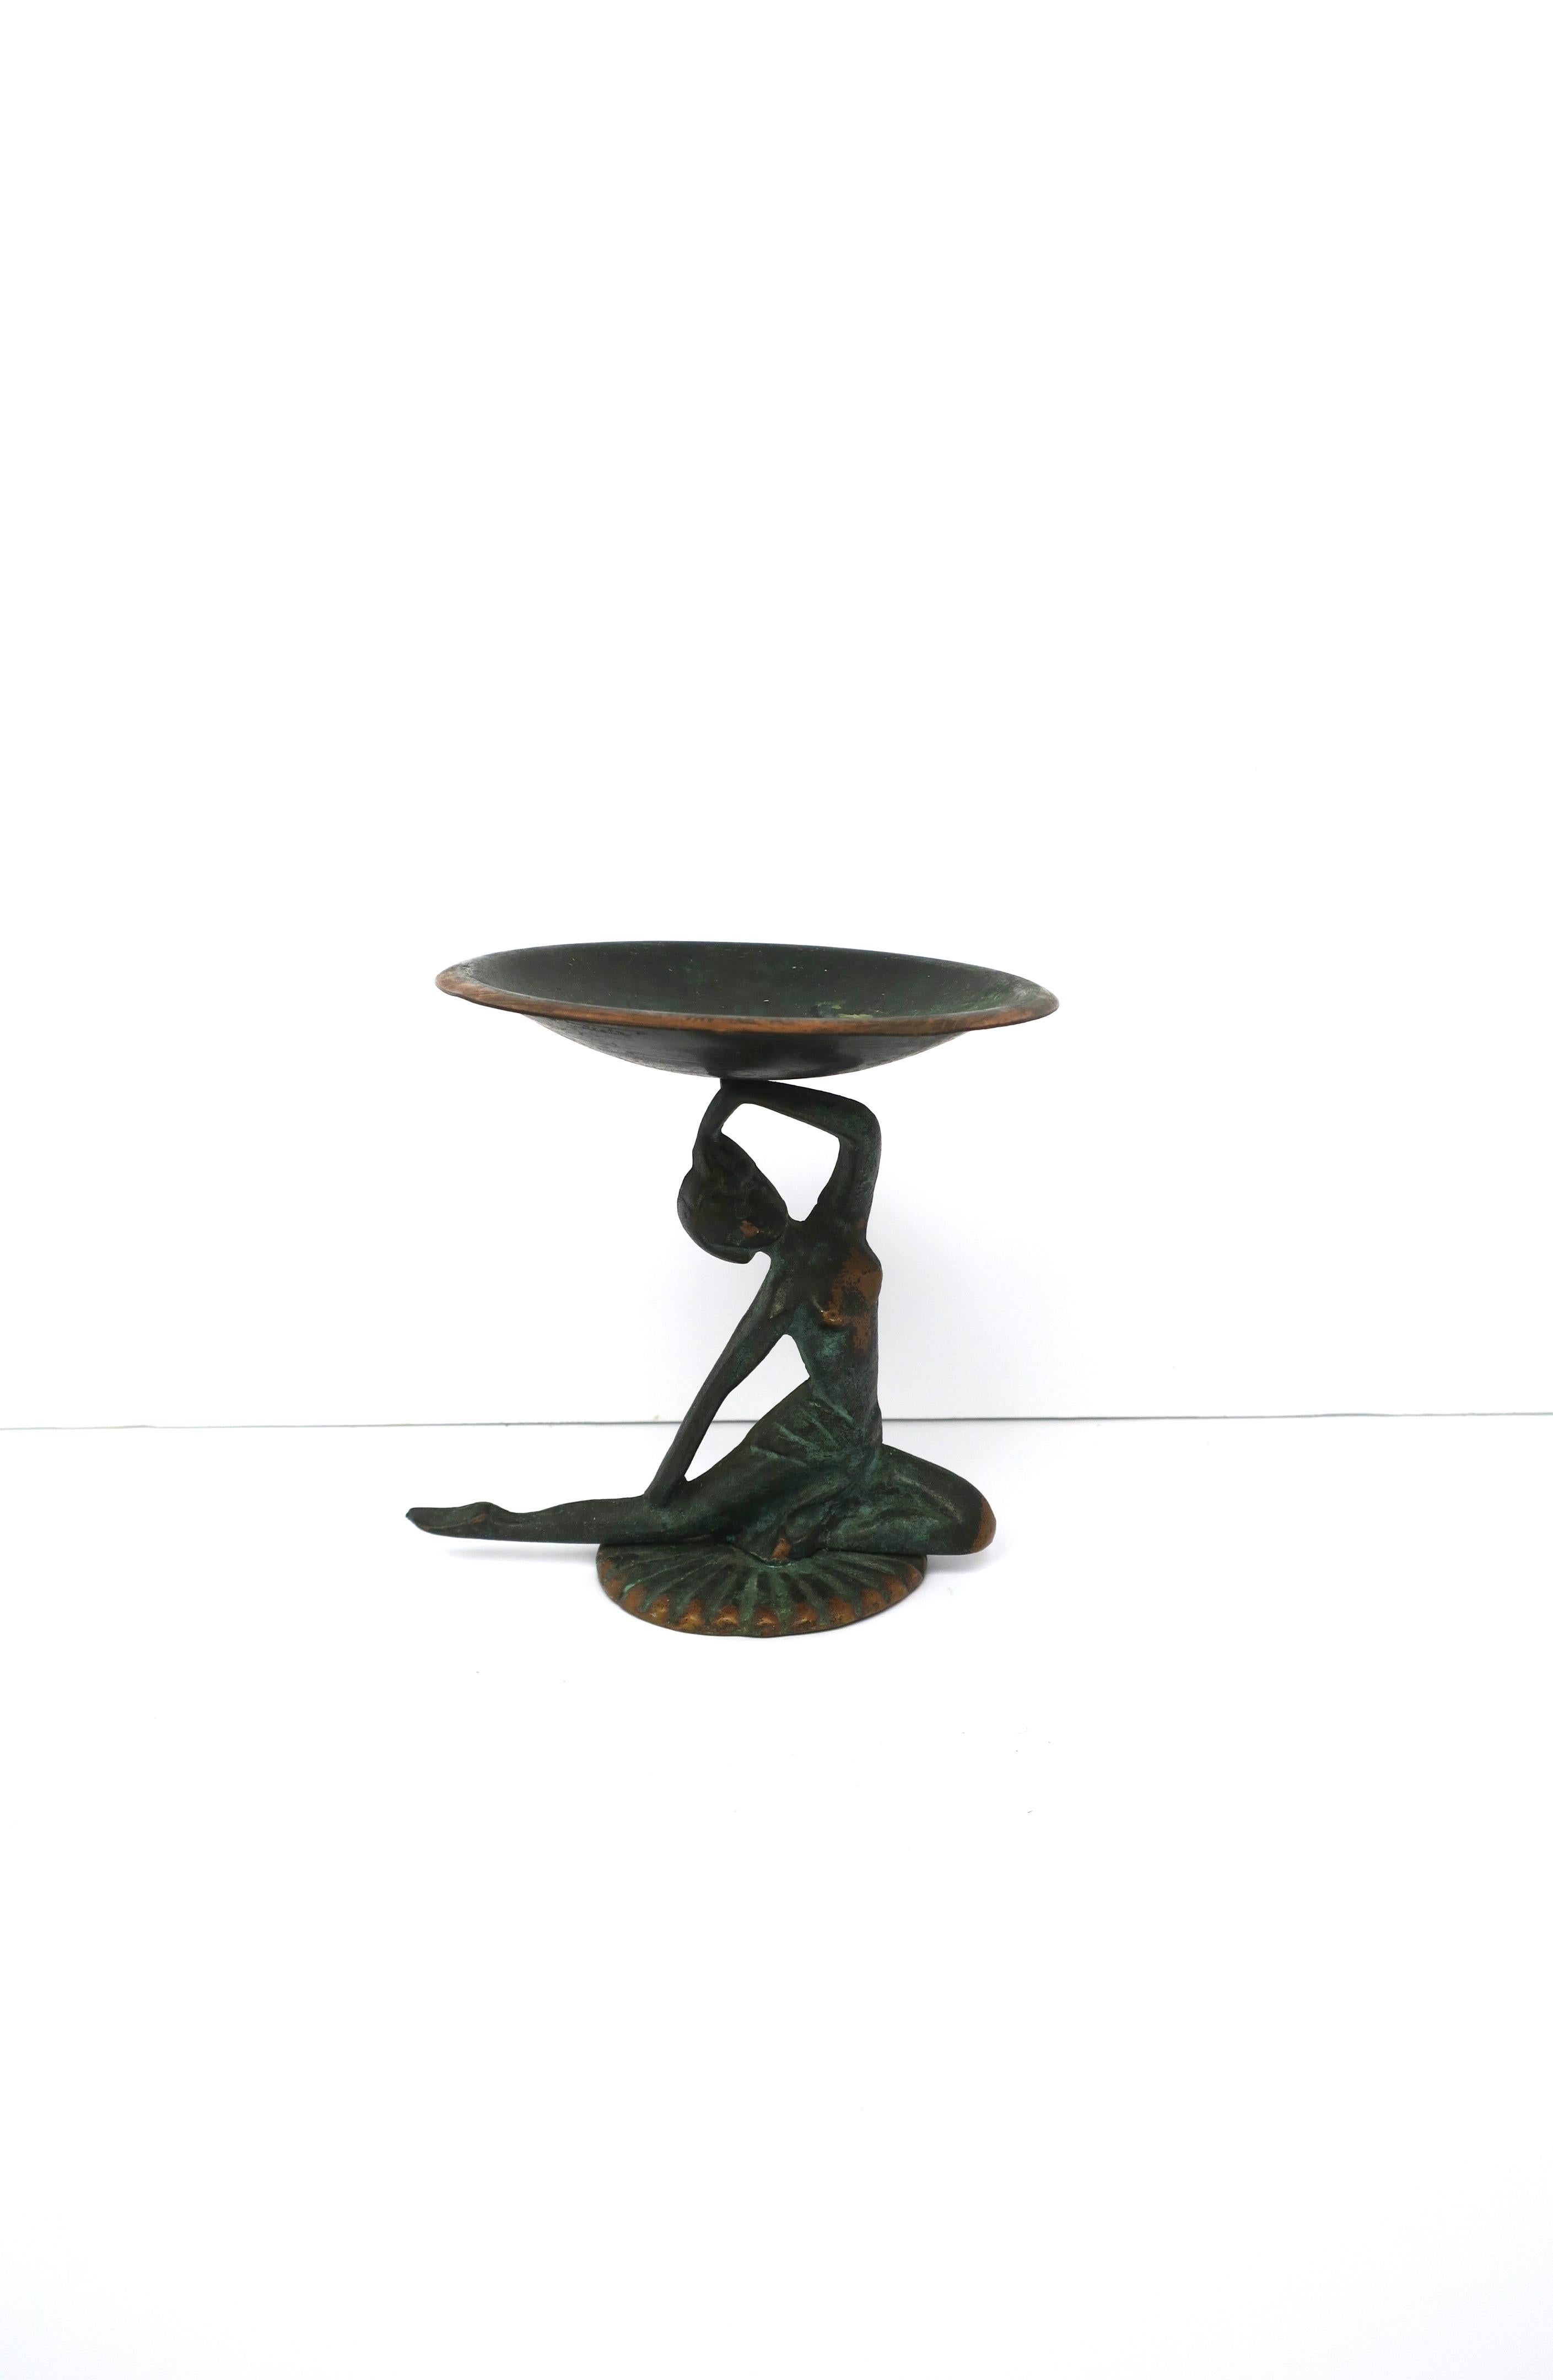 A bronze/brass and copper Art Deco period tazza coupe compote with female figurative design, circa early-20th century, Europe. Piece has a verdigris green finish over its copper and bronze makeup. Coup is copper with a verdigris green finish, and